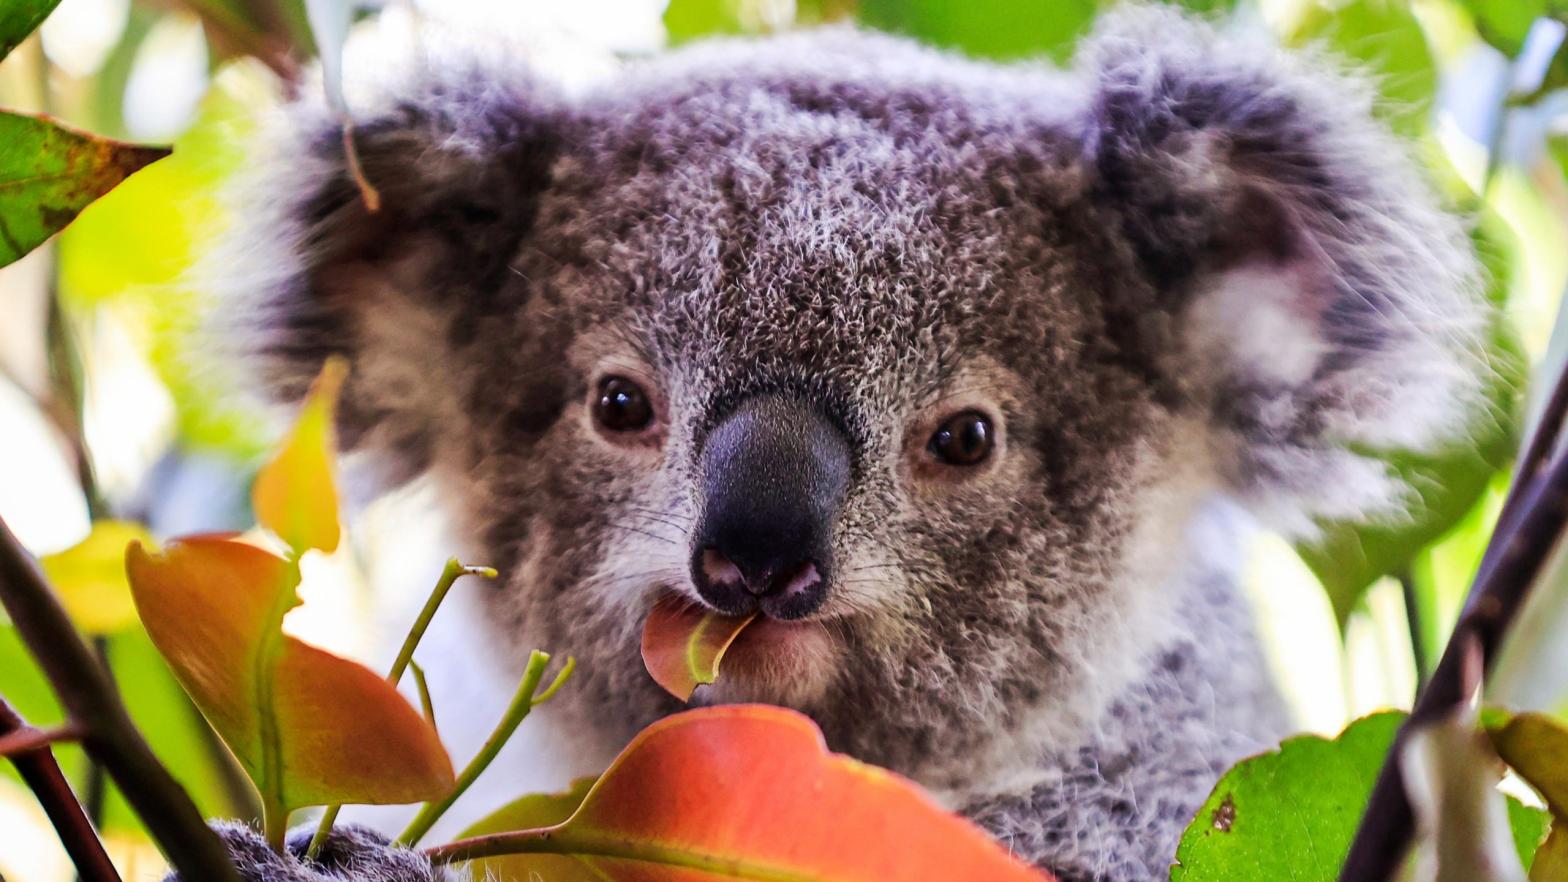 A baby koala is seen at the Wild Life Sydney Zoo on October 14, 2021 in Sydney, Australia. (Photo: Mark Evans, Getty Images)